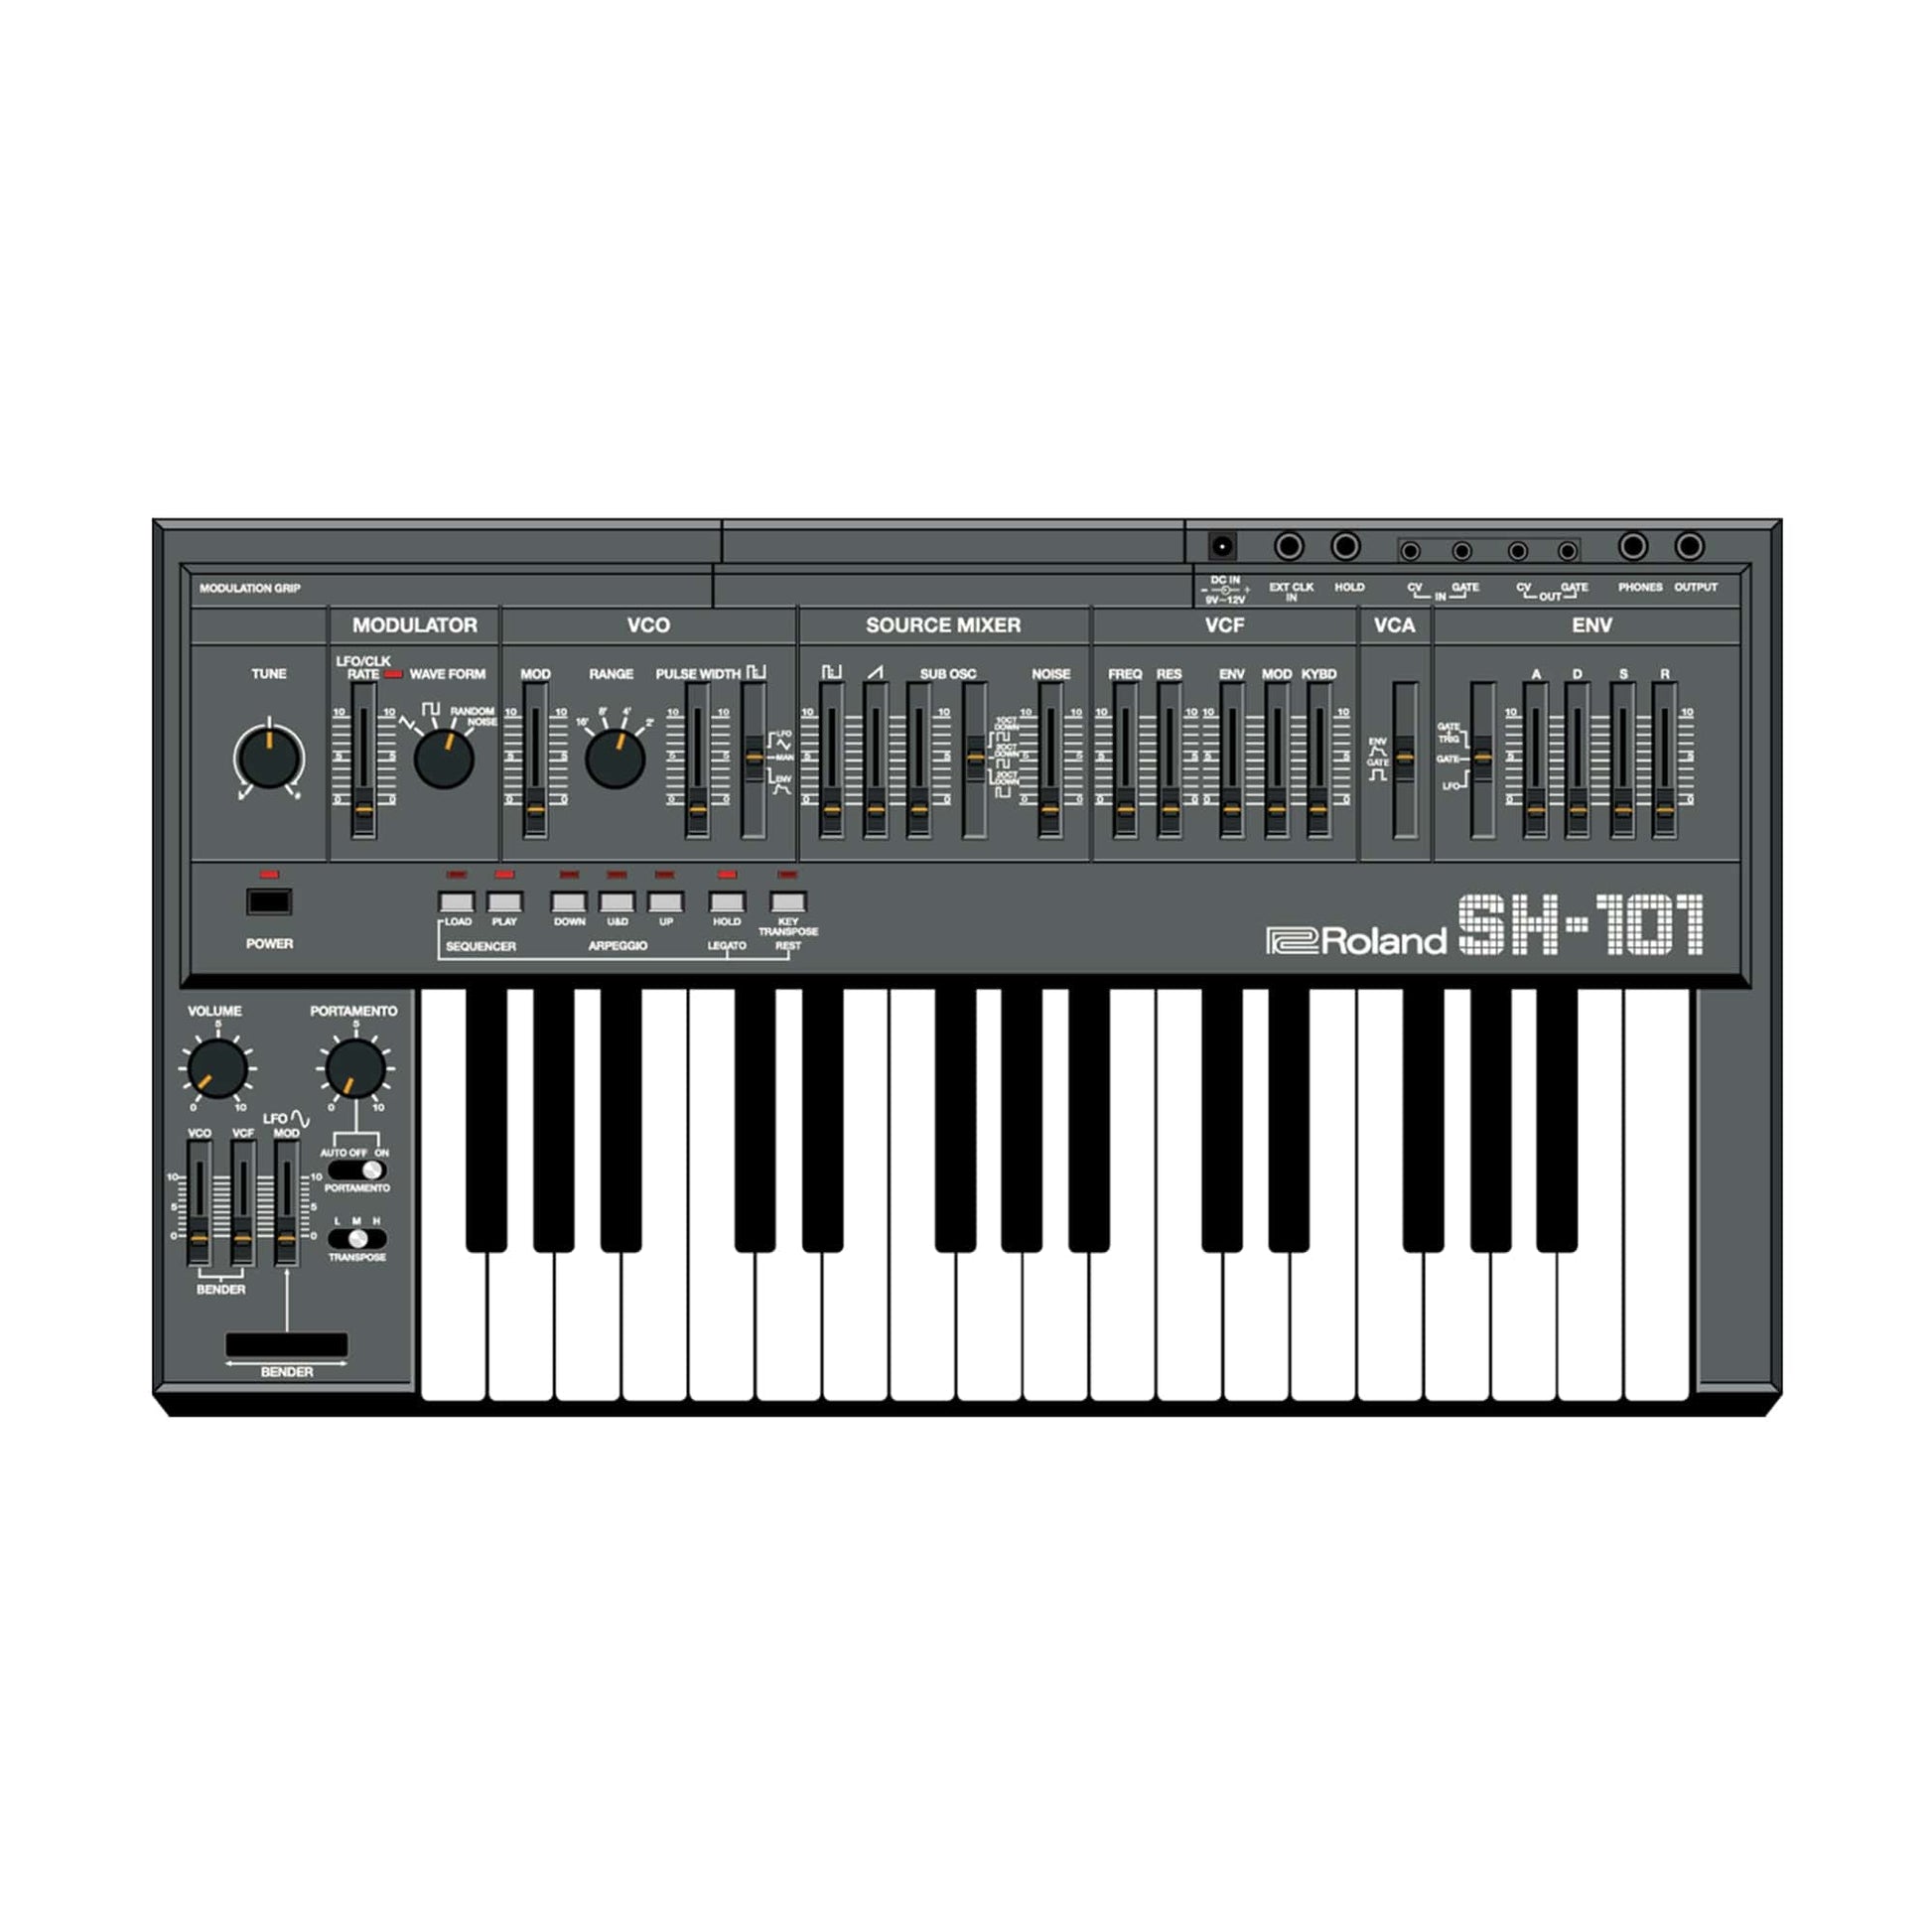 https://www.roland.com/global/products/rc_sh-101_model_expansion/